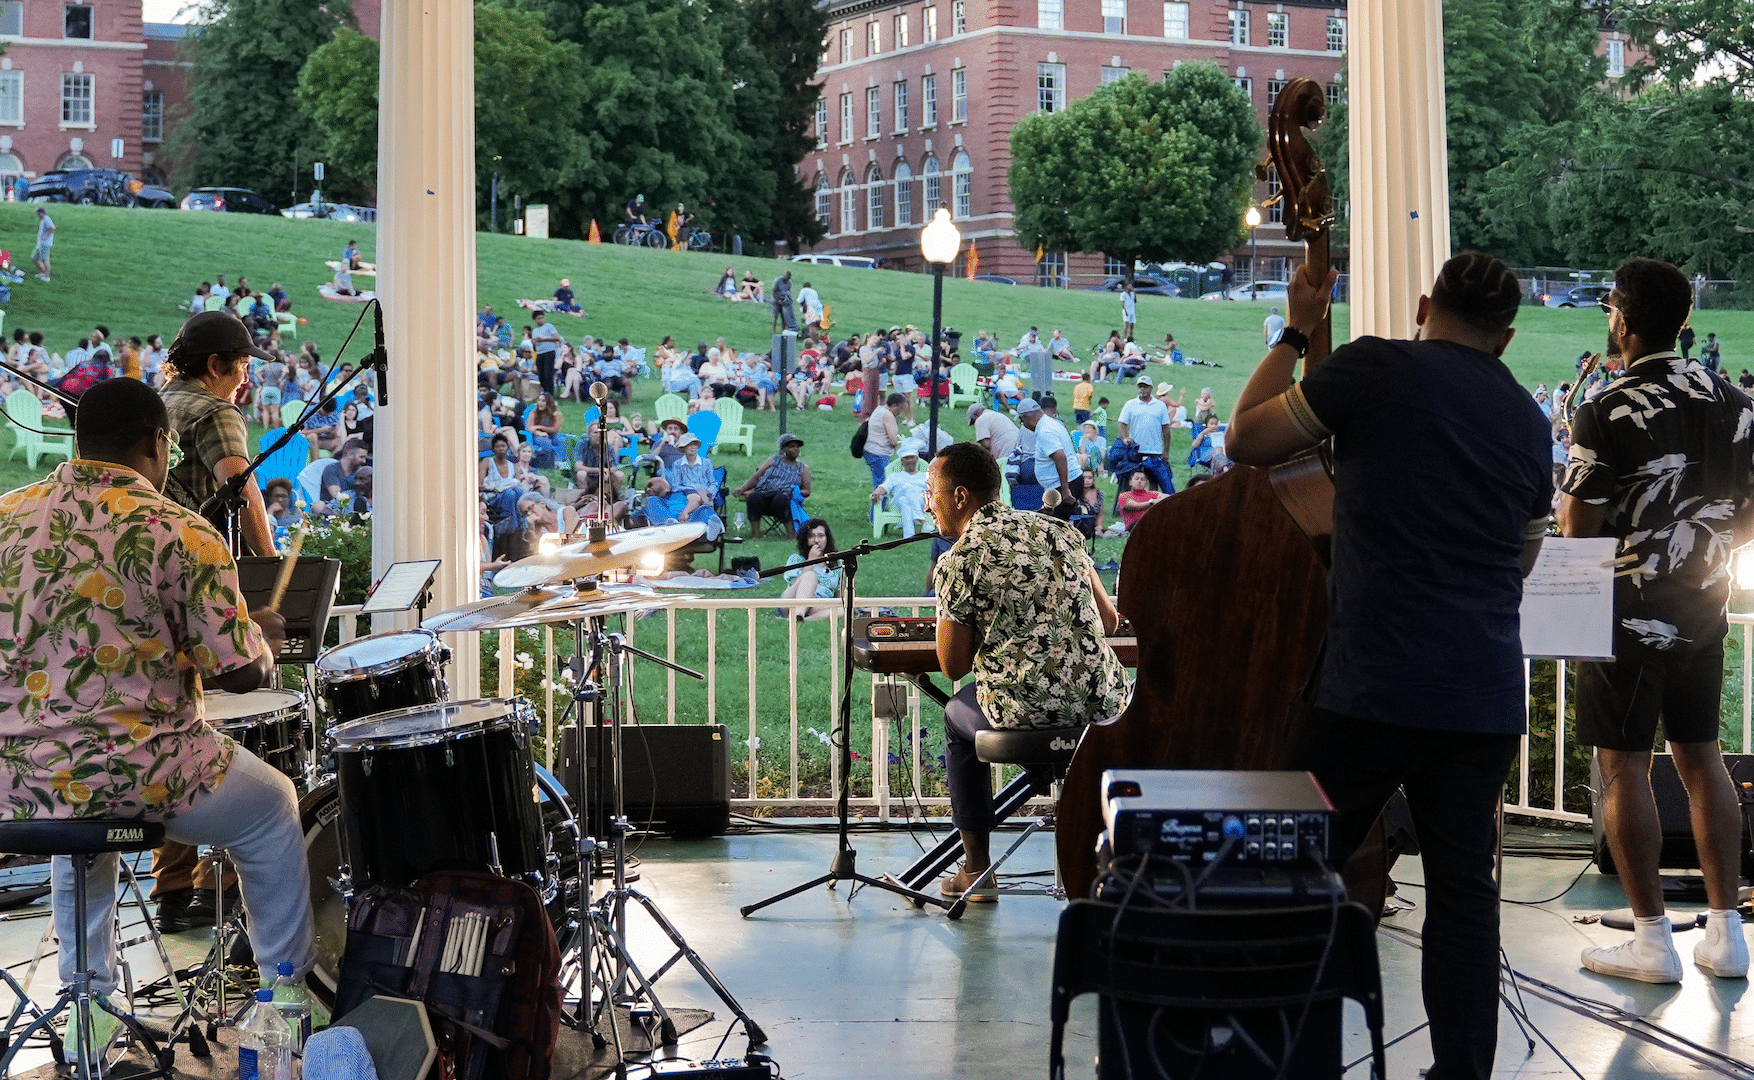 A band plays music outside for a crowd.